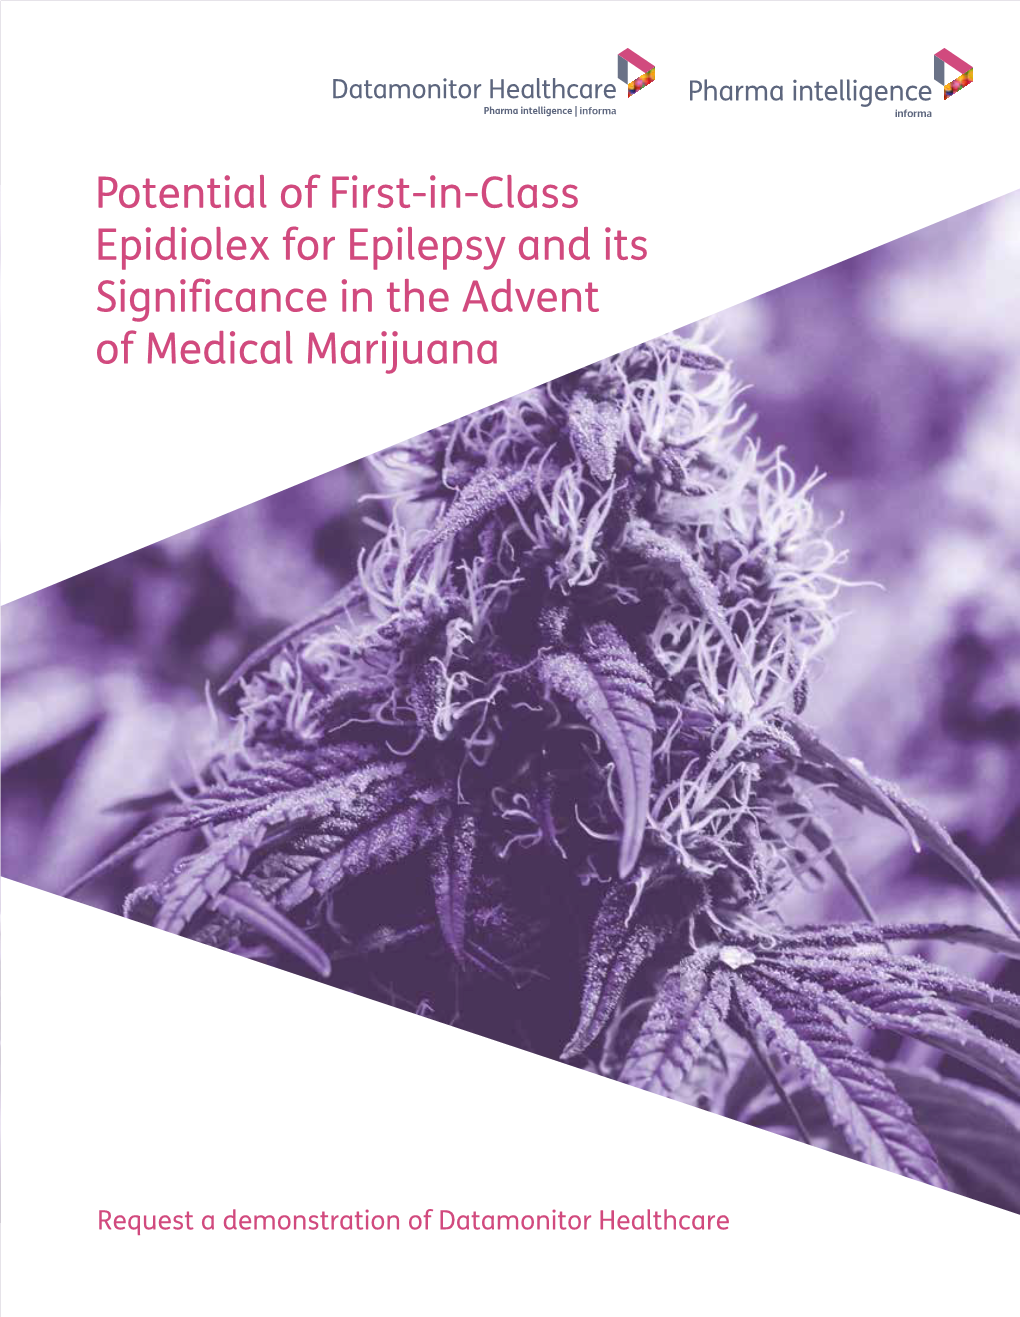 Potential of First-In-Class Epidiolex for Epilepsy and Its Significance in the Advent of Medical Marijuana